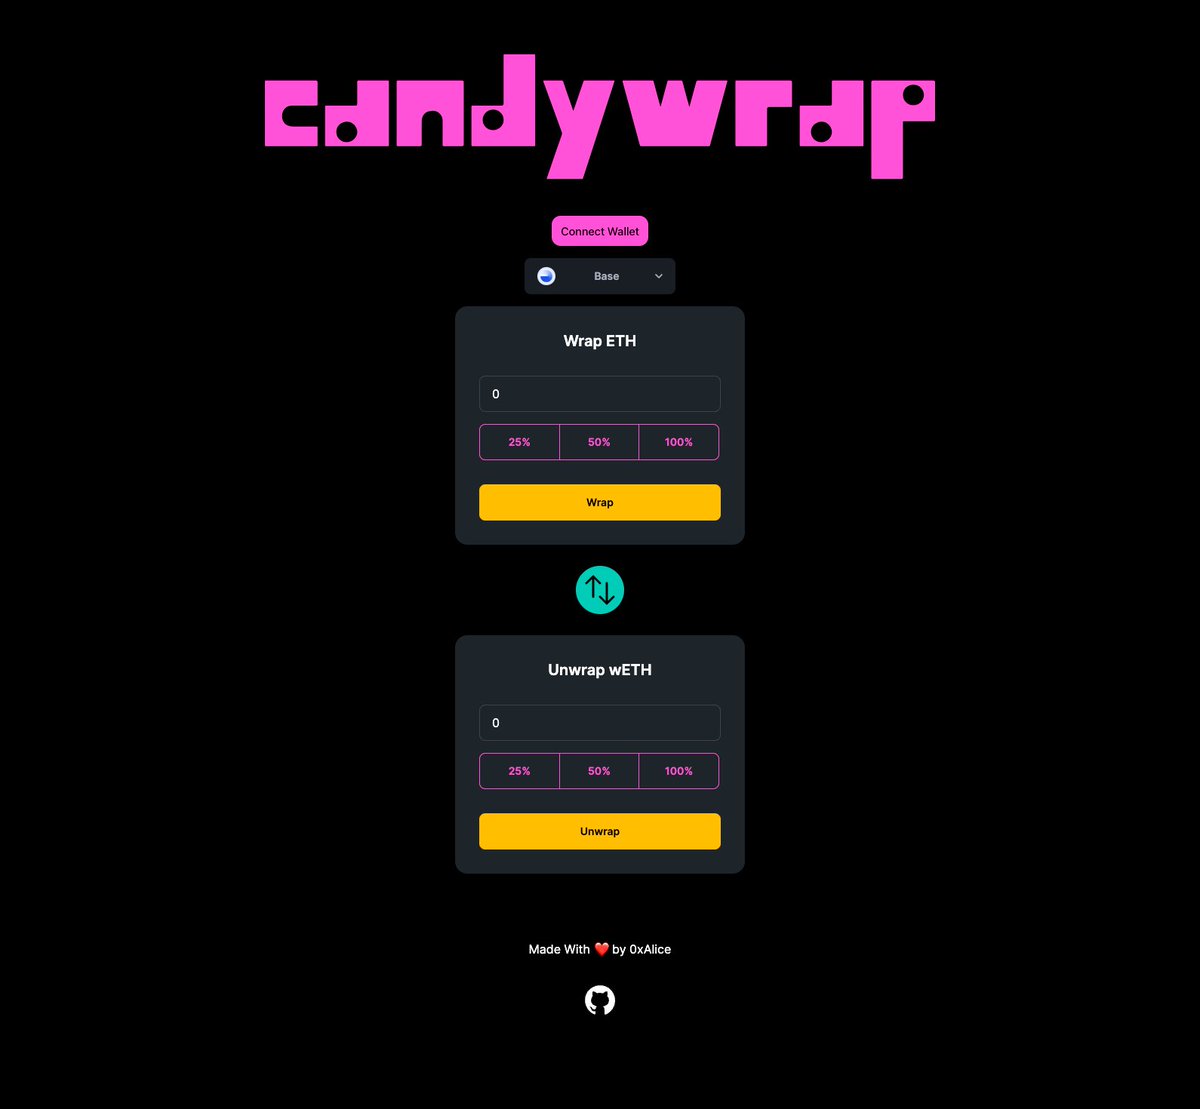 Happy to release a little side project: candywrap.dev Effortlessly and cheaply wrap and unwrap native tokens on more than 20 EVM chains (number is growing as fast as I can test). Still need to do some UI stuff like spinners/disable ui. DMs are open for feedback!